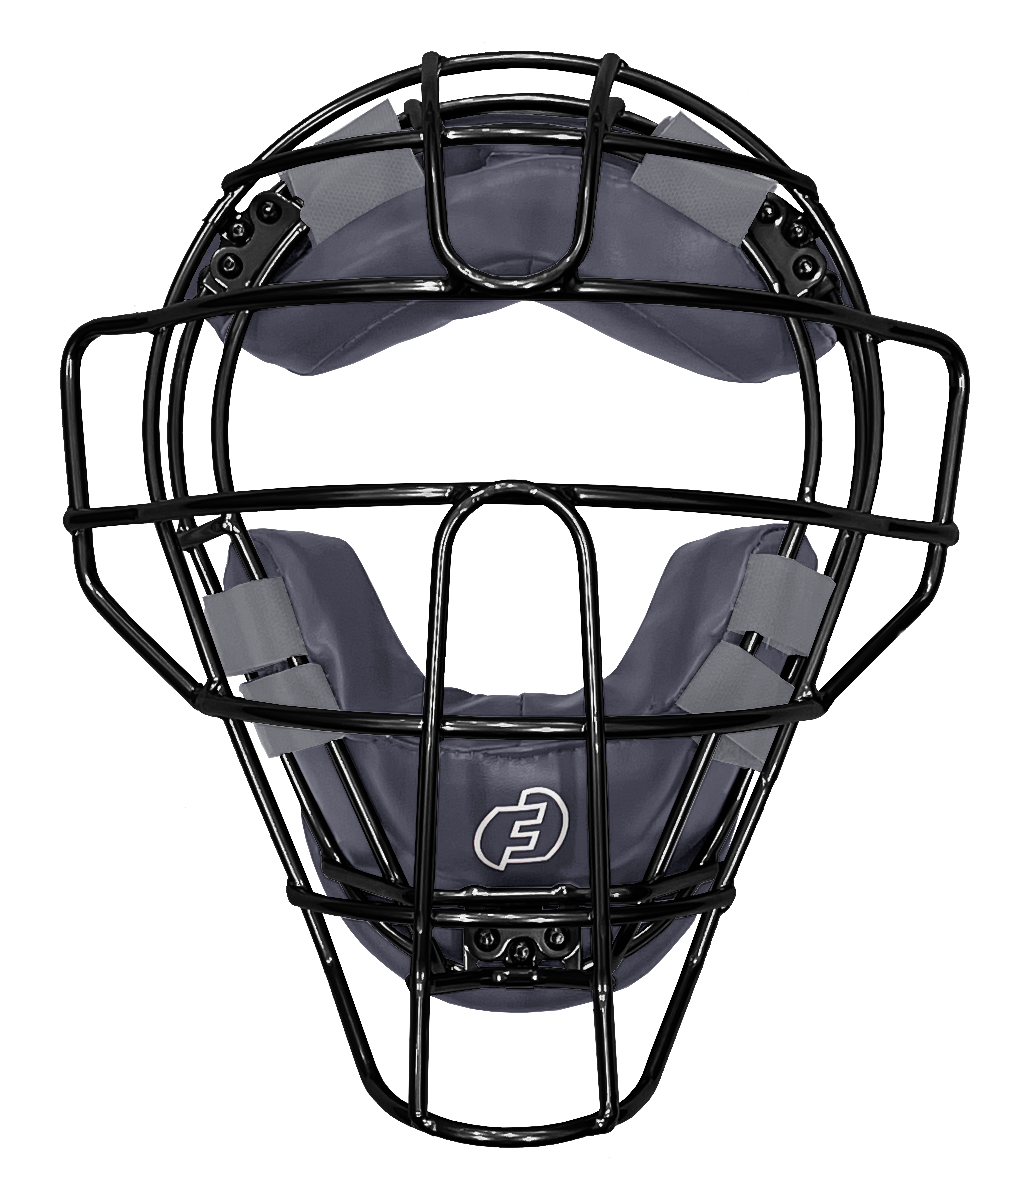 Catchers are the latest to benefit from the new era in protection with the  Force3 Defender mask - ESPN